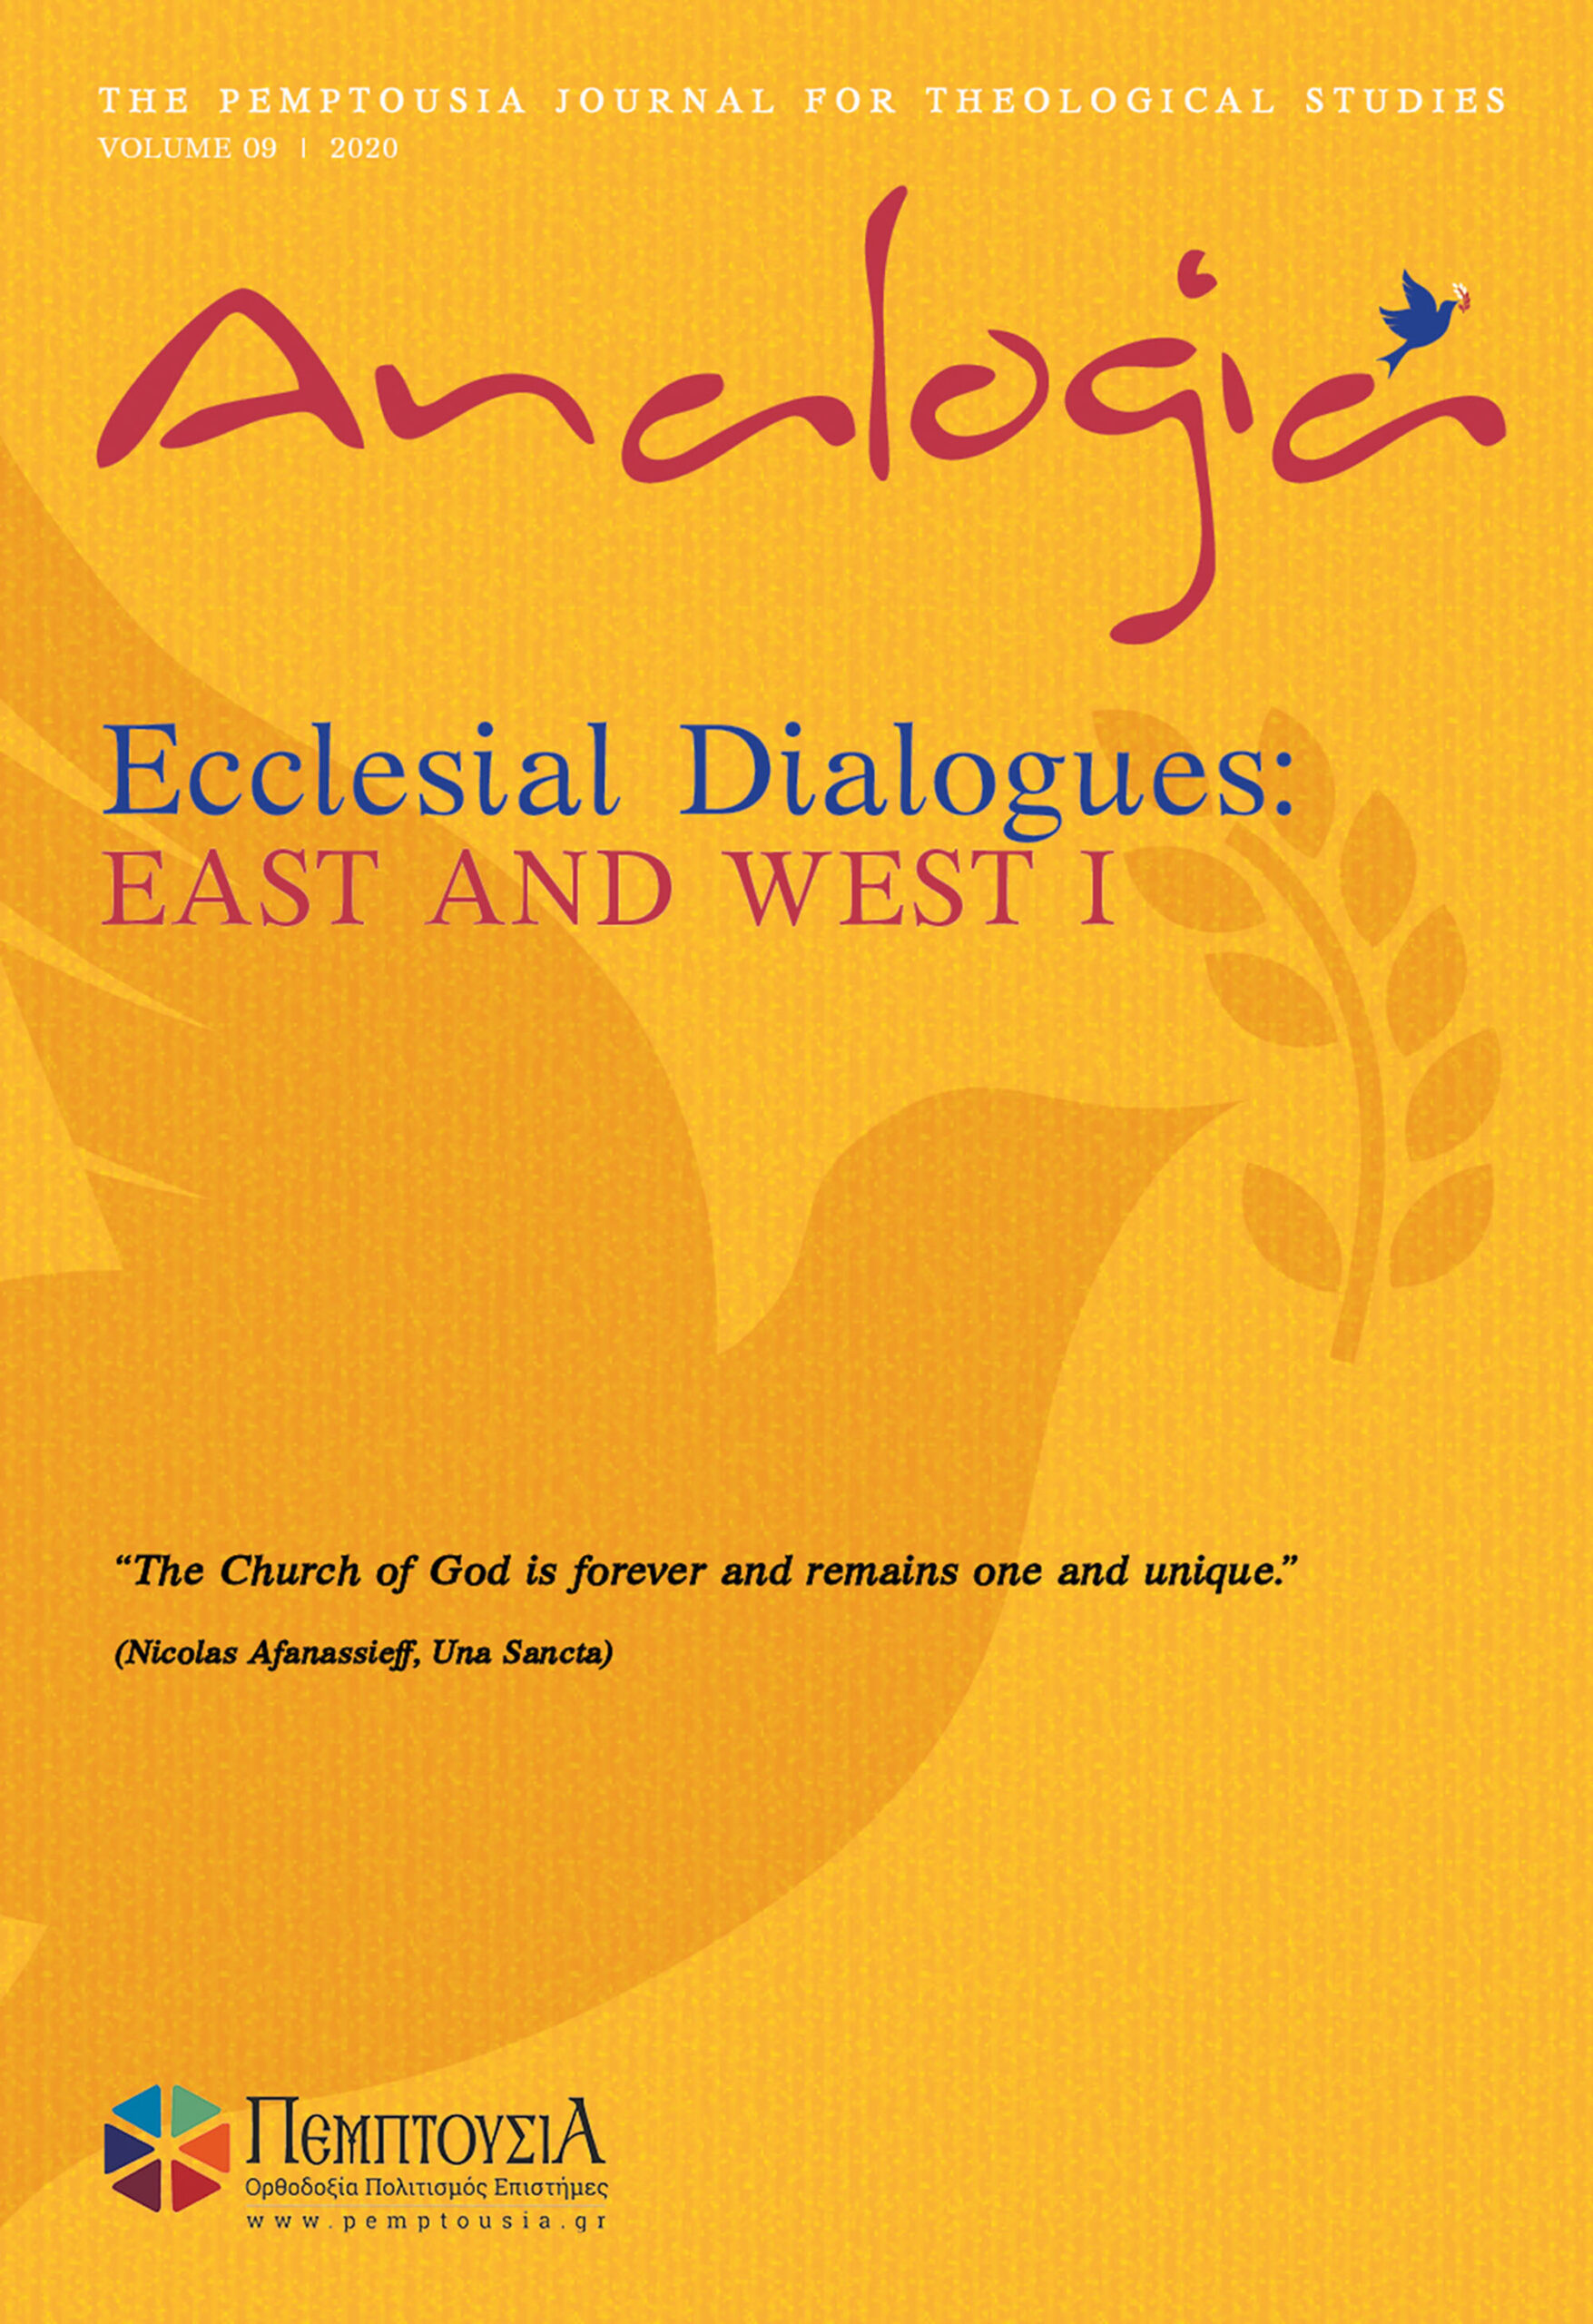 Ecclesial Dialogues: East and West I